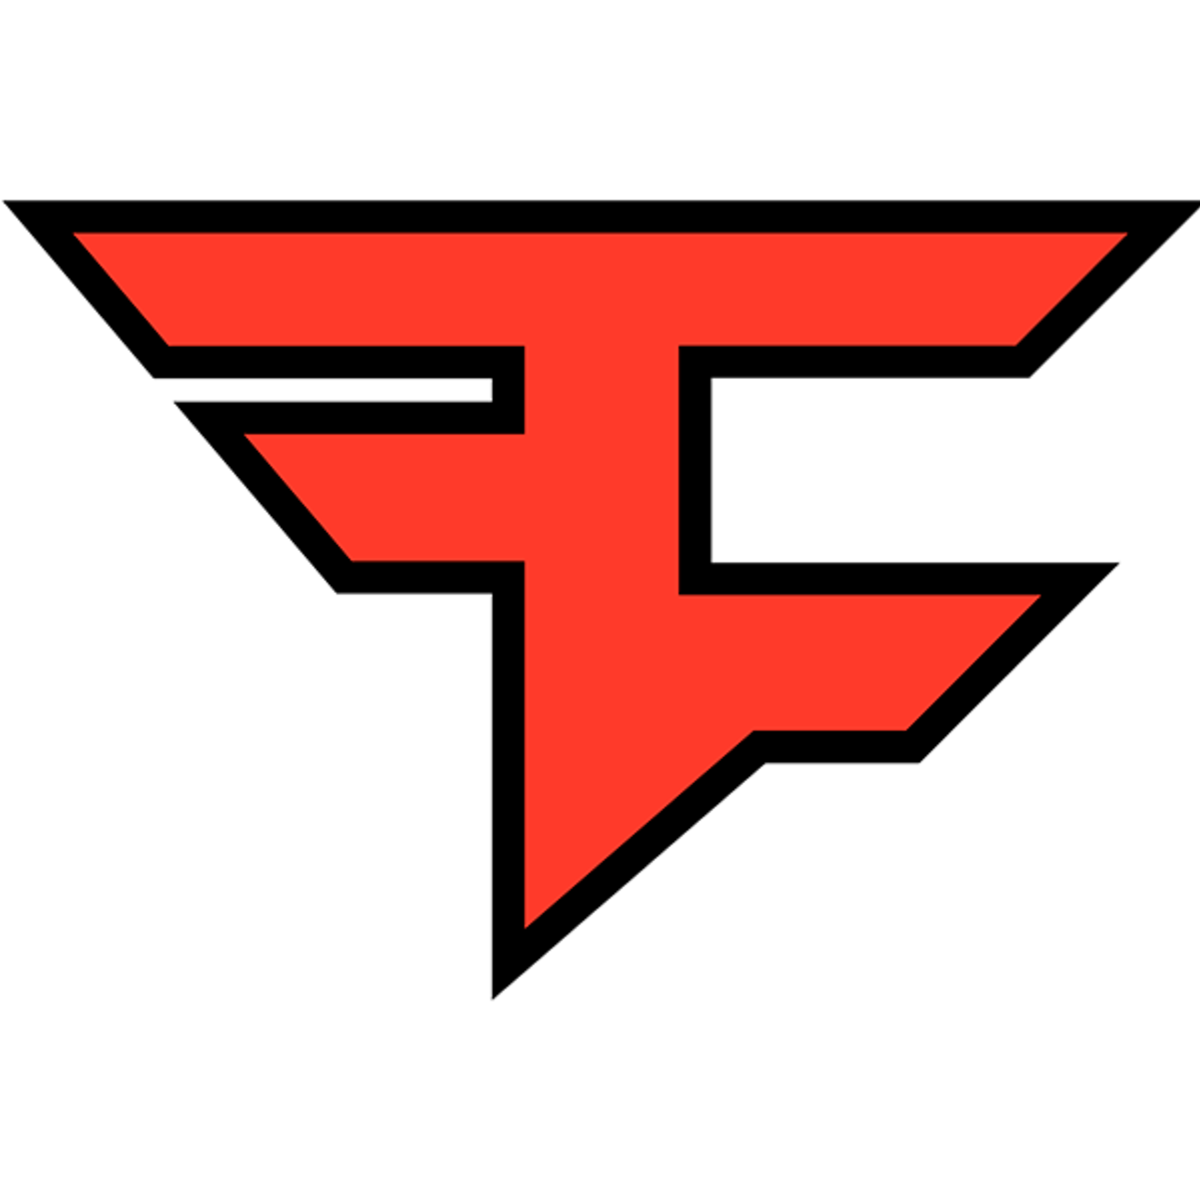 FaZe Clan vs Virtus.pro Prediction: A lot of emotions, twists, and turns